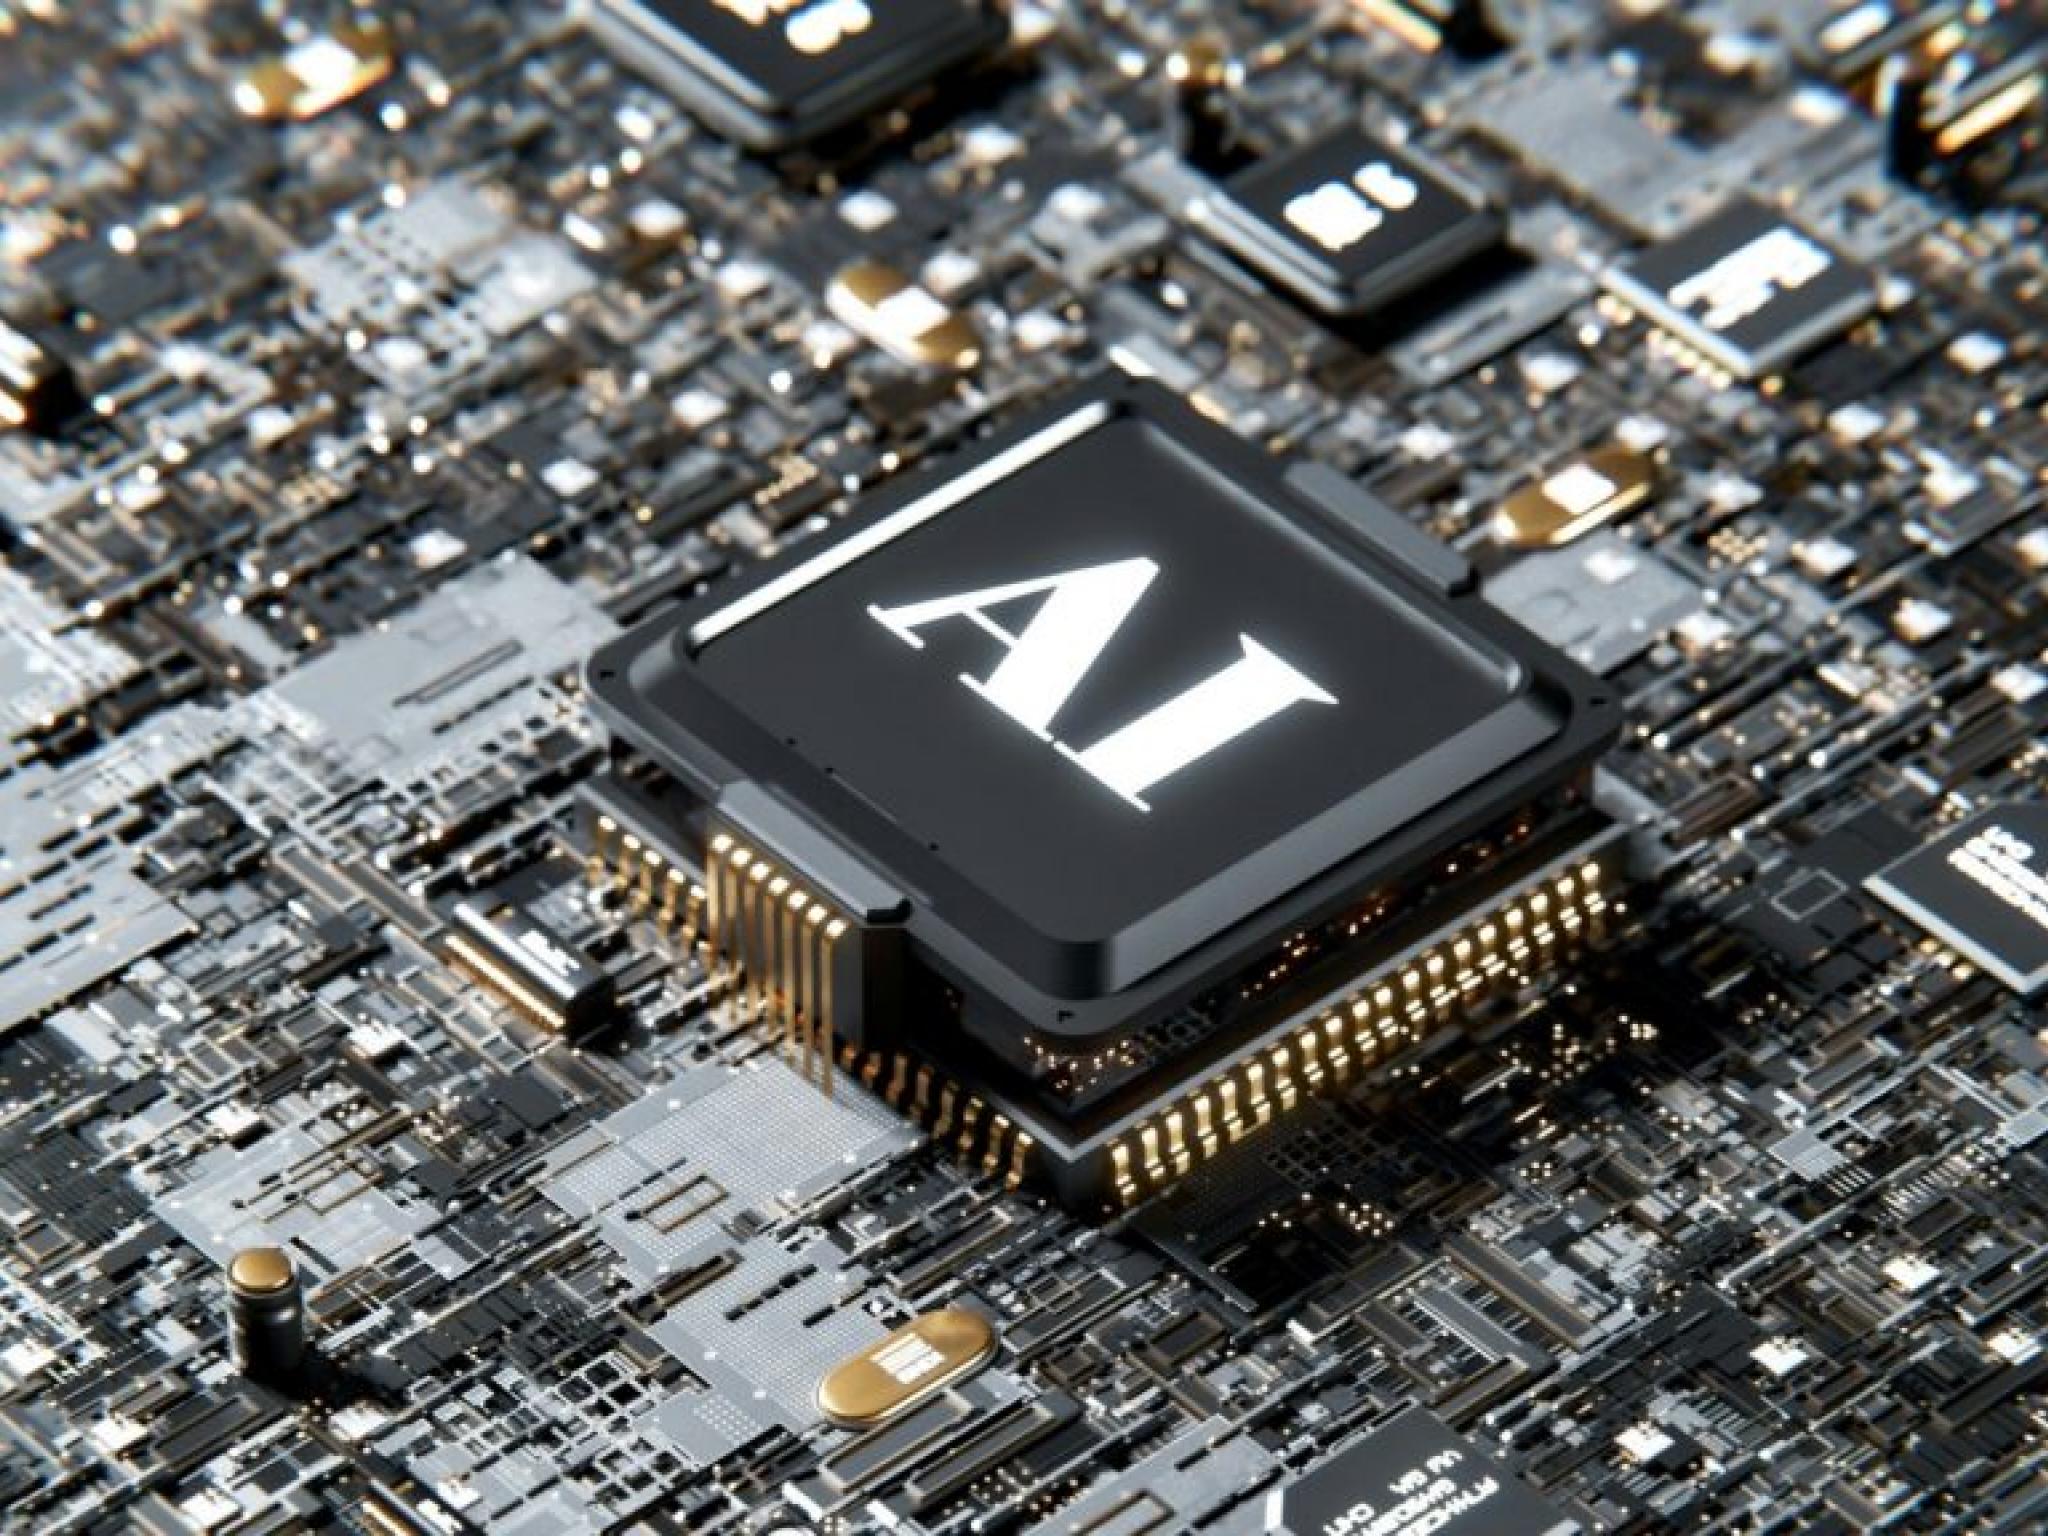  quicklogic-shares-zoom-616-in-4-years-could-this-chipmaker-be-on-a-nvidia-style-trajectory-corrected 